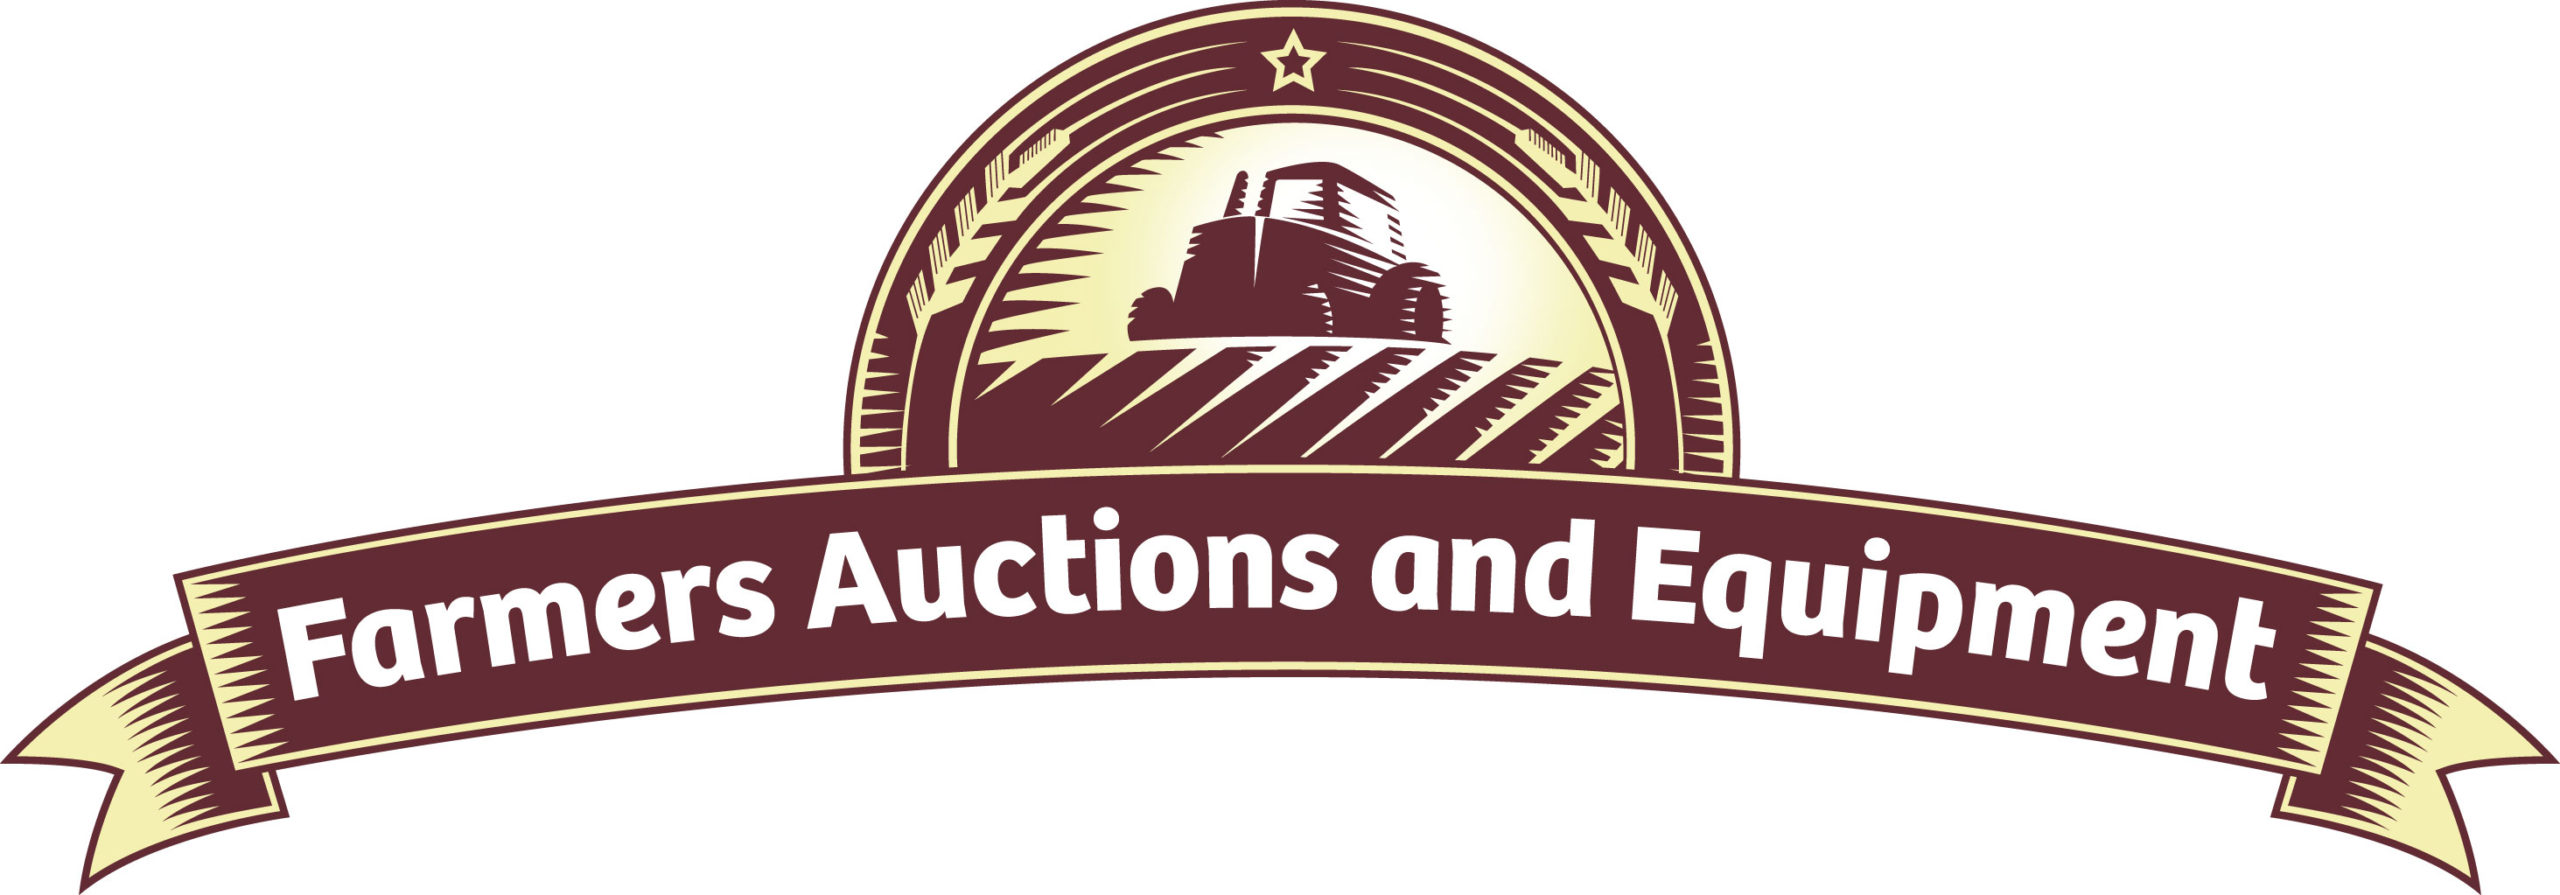 Farmers Auction And Equipment